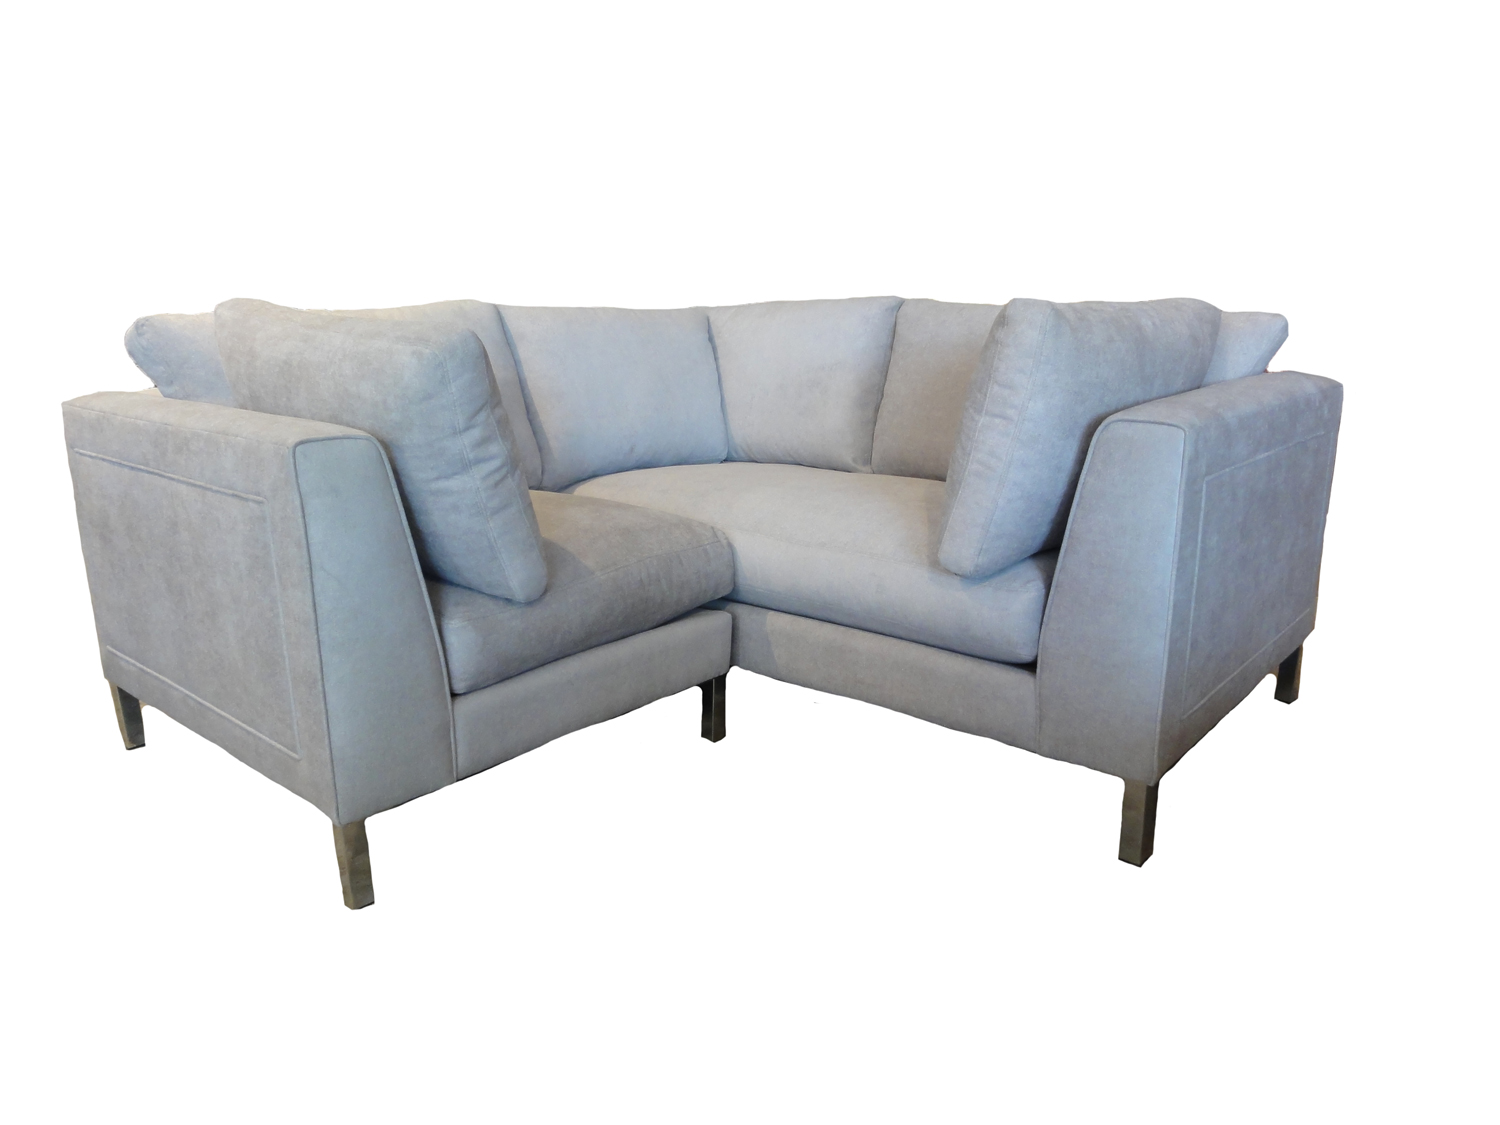 Madelynn sectional with return santa barbara design center sofa couch loveseat rugs